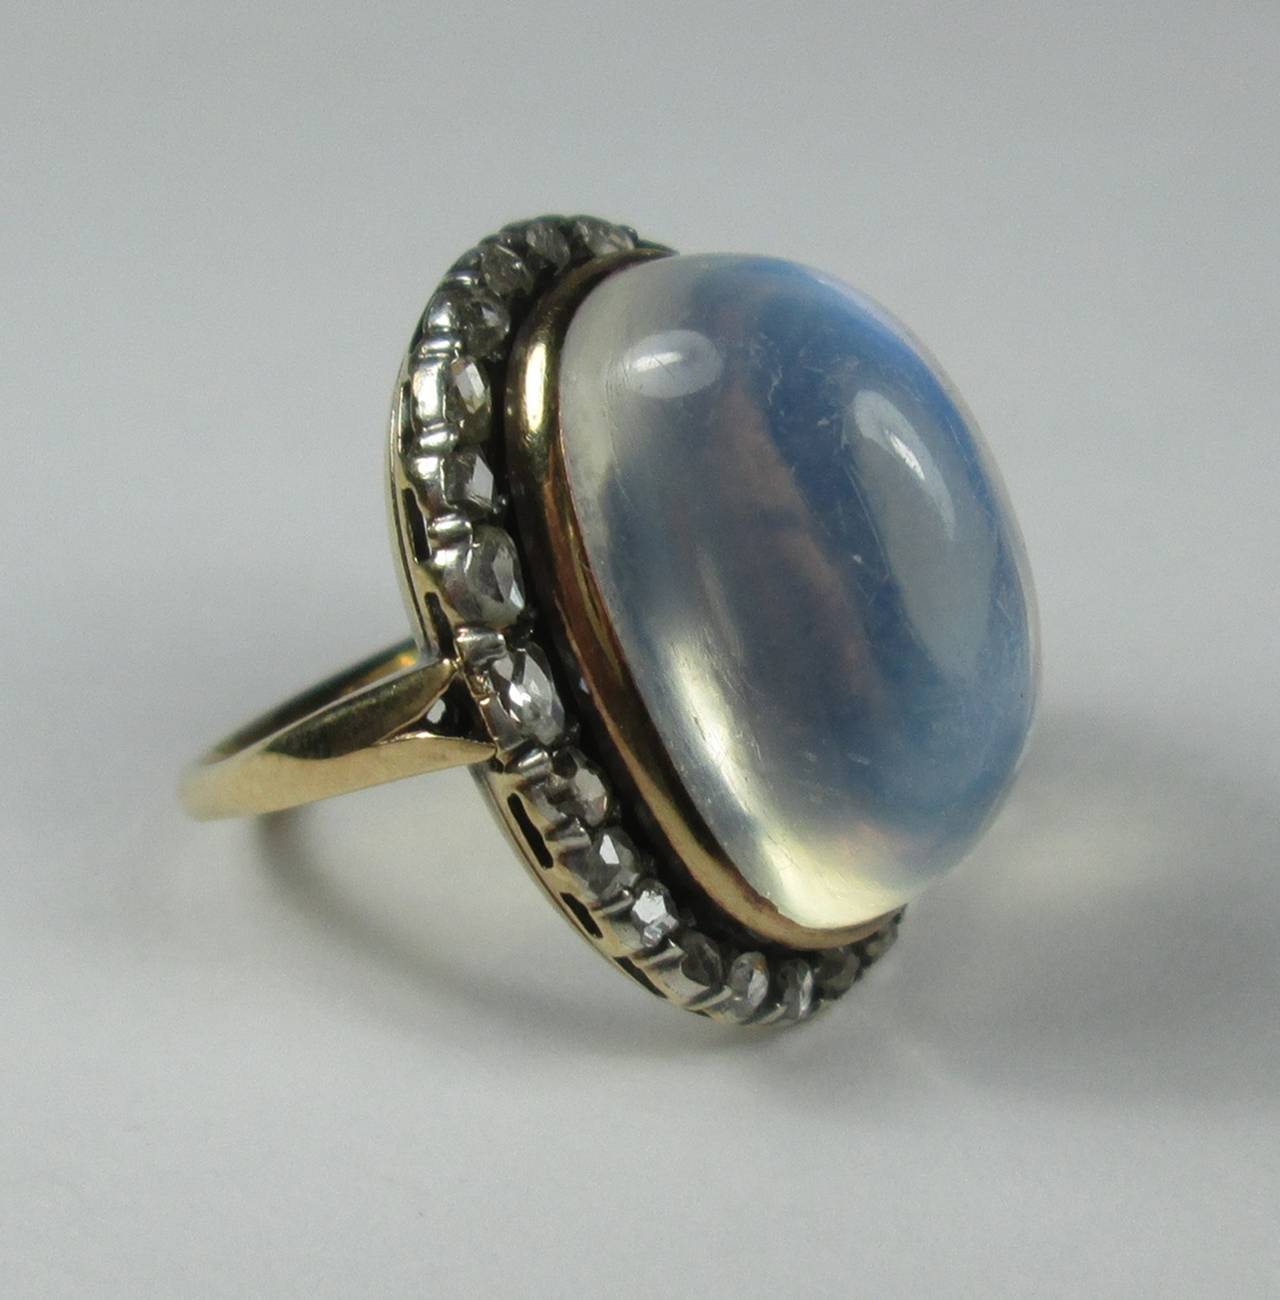 The central oval moonstone cabochon with a nice blue adularescence, to a silver topped diamond cluster surround.

Mounted in yellow gold

Finger size: 7 

Weight: 8.4 gr

PLEASE NOTE: OUR PRICE IS FULLY INCLUSIVE OF SHIPPING, IMPORTATION